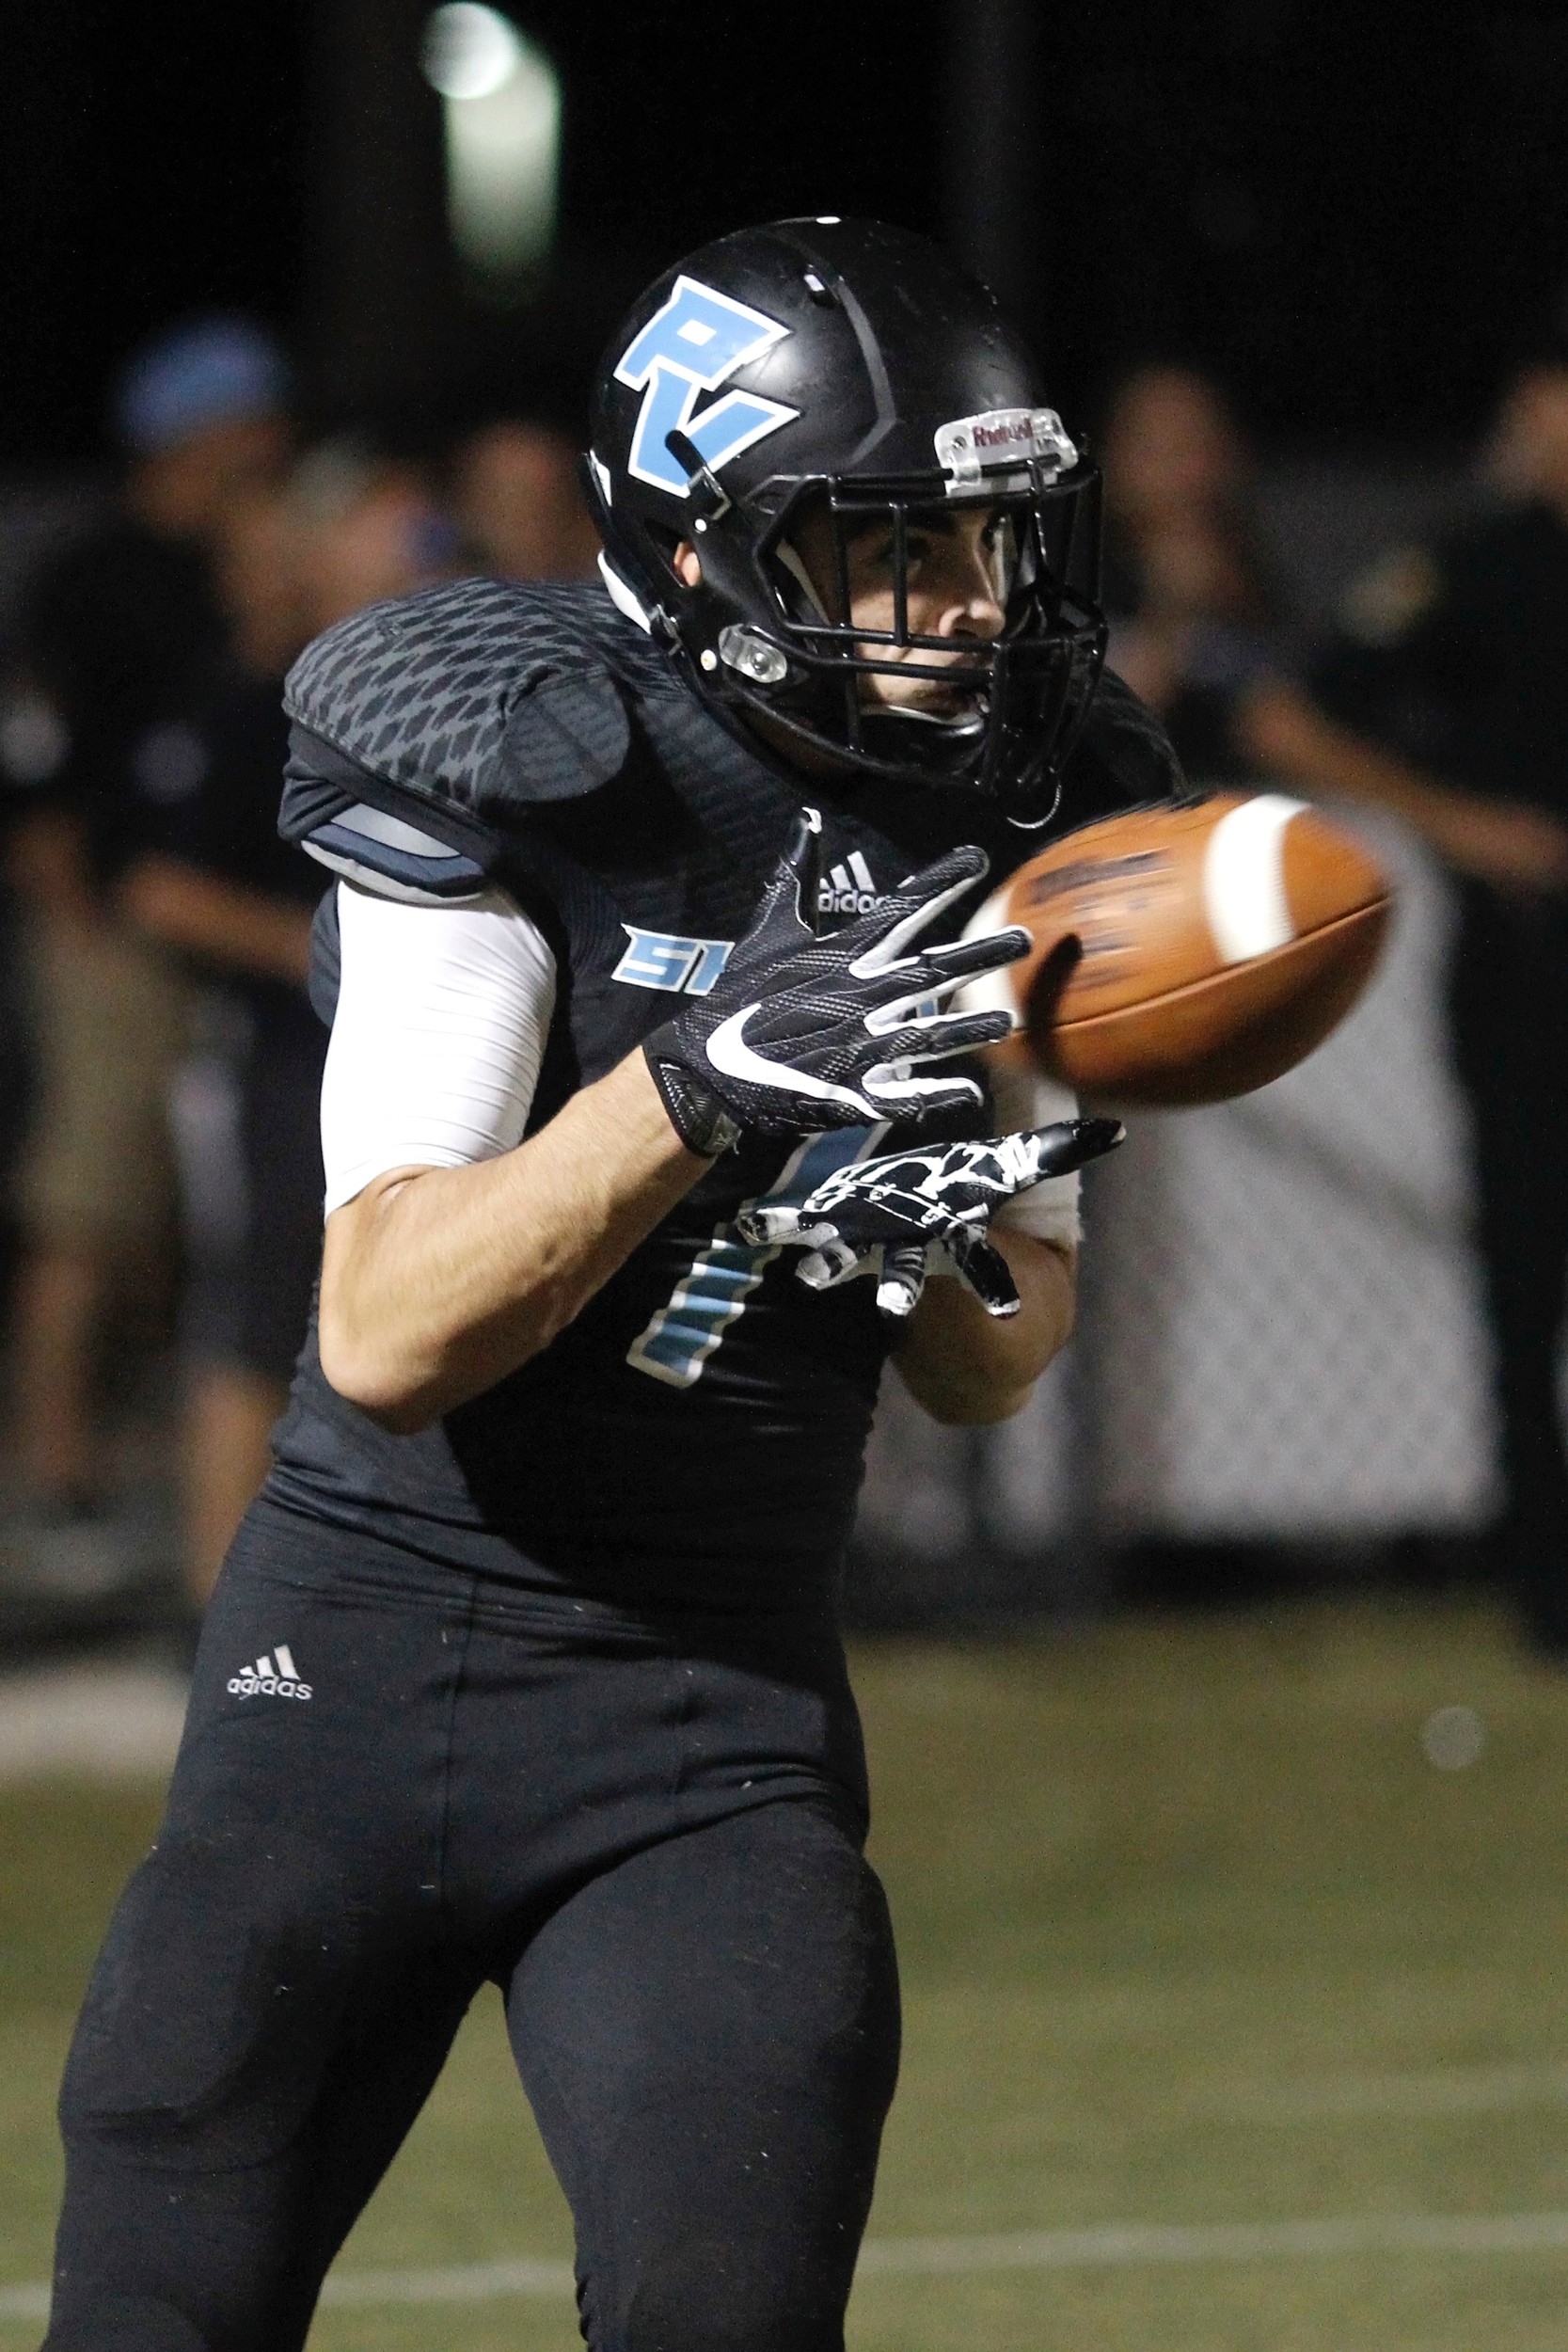 The Sharks’ #7 Jake Maguire pulls in a touchdown pass from Nick Tronti